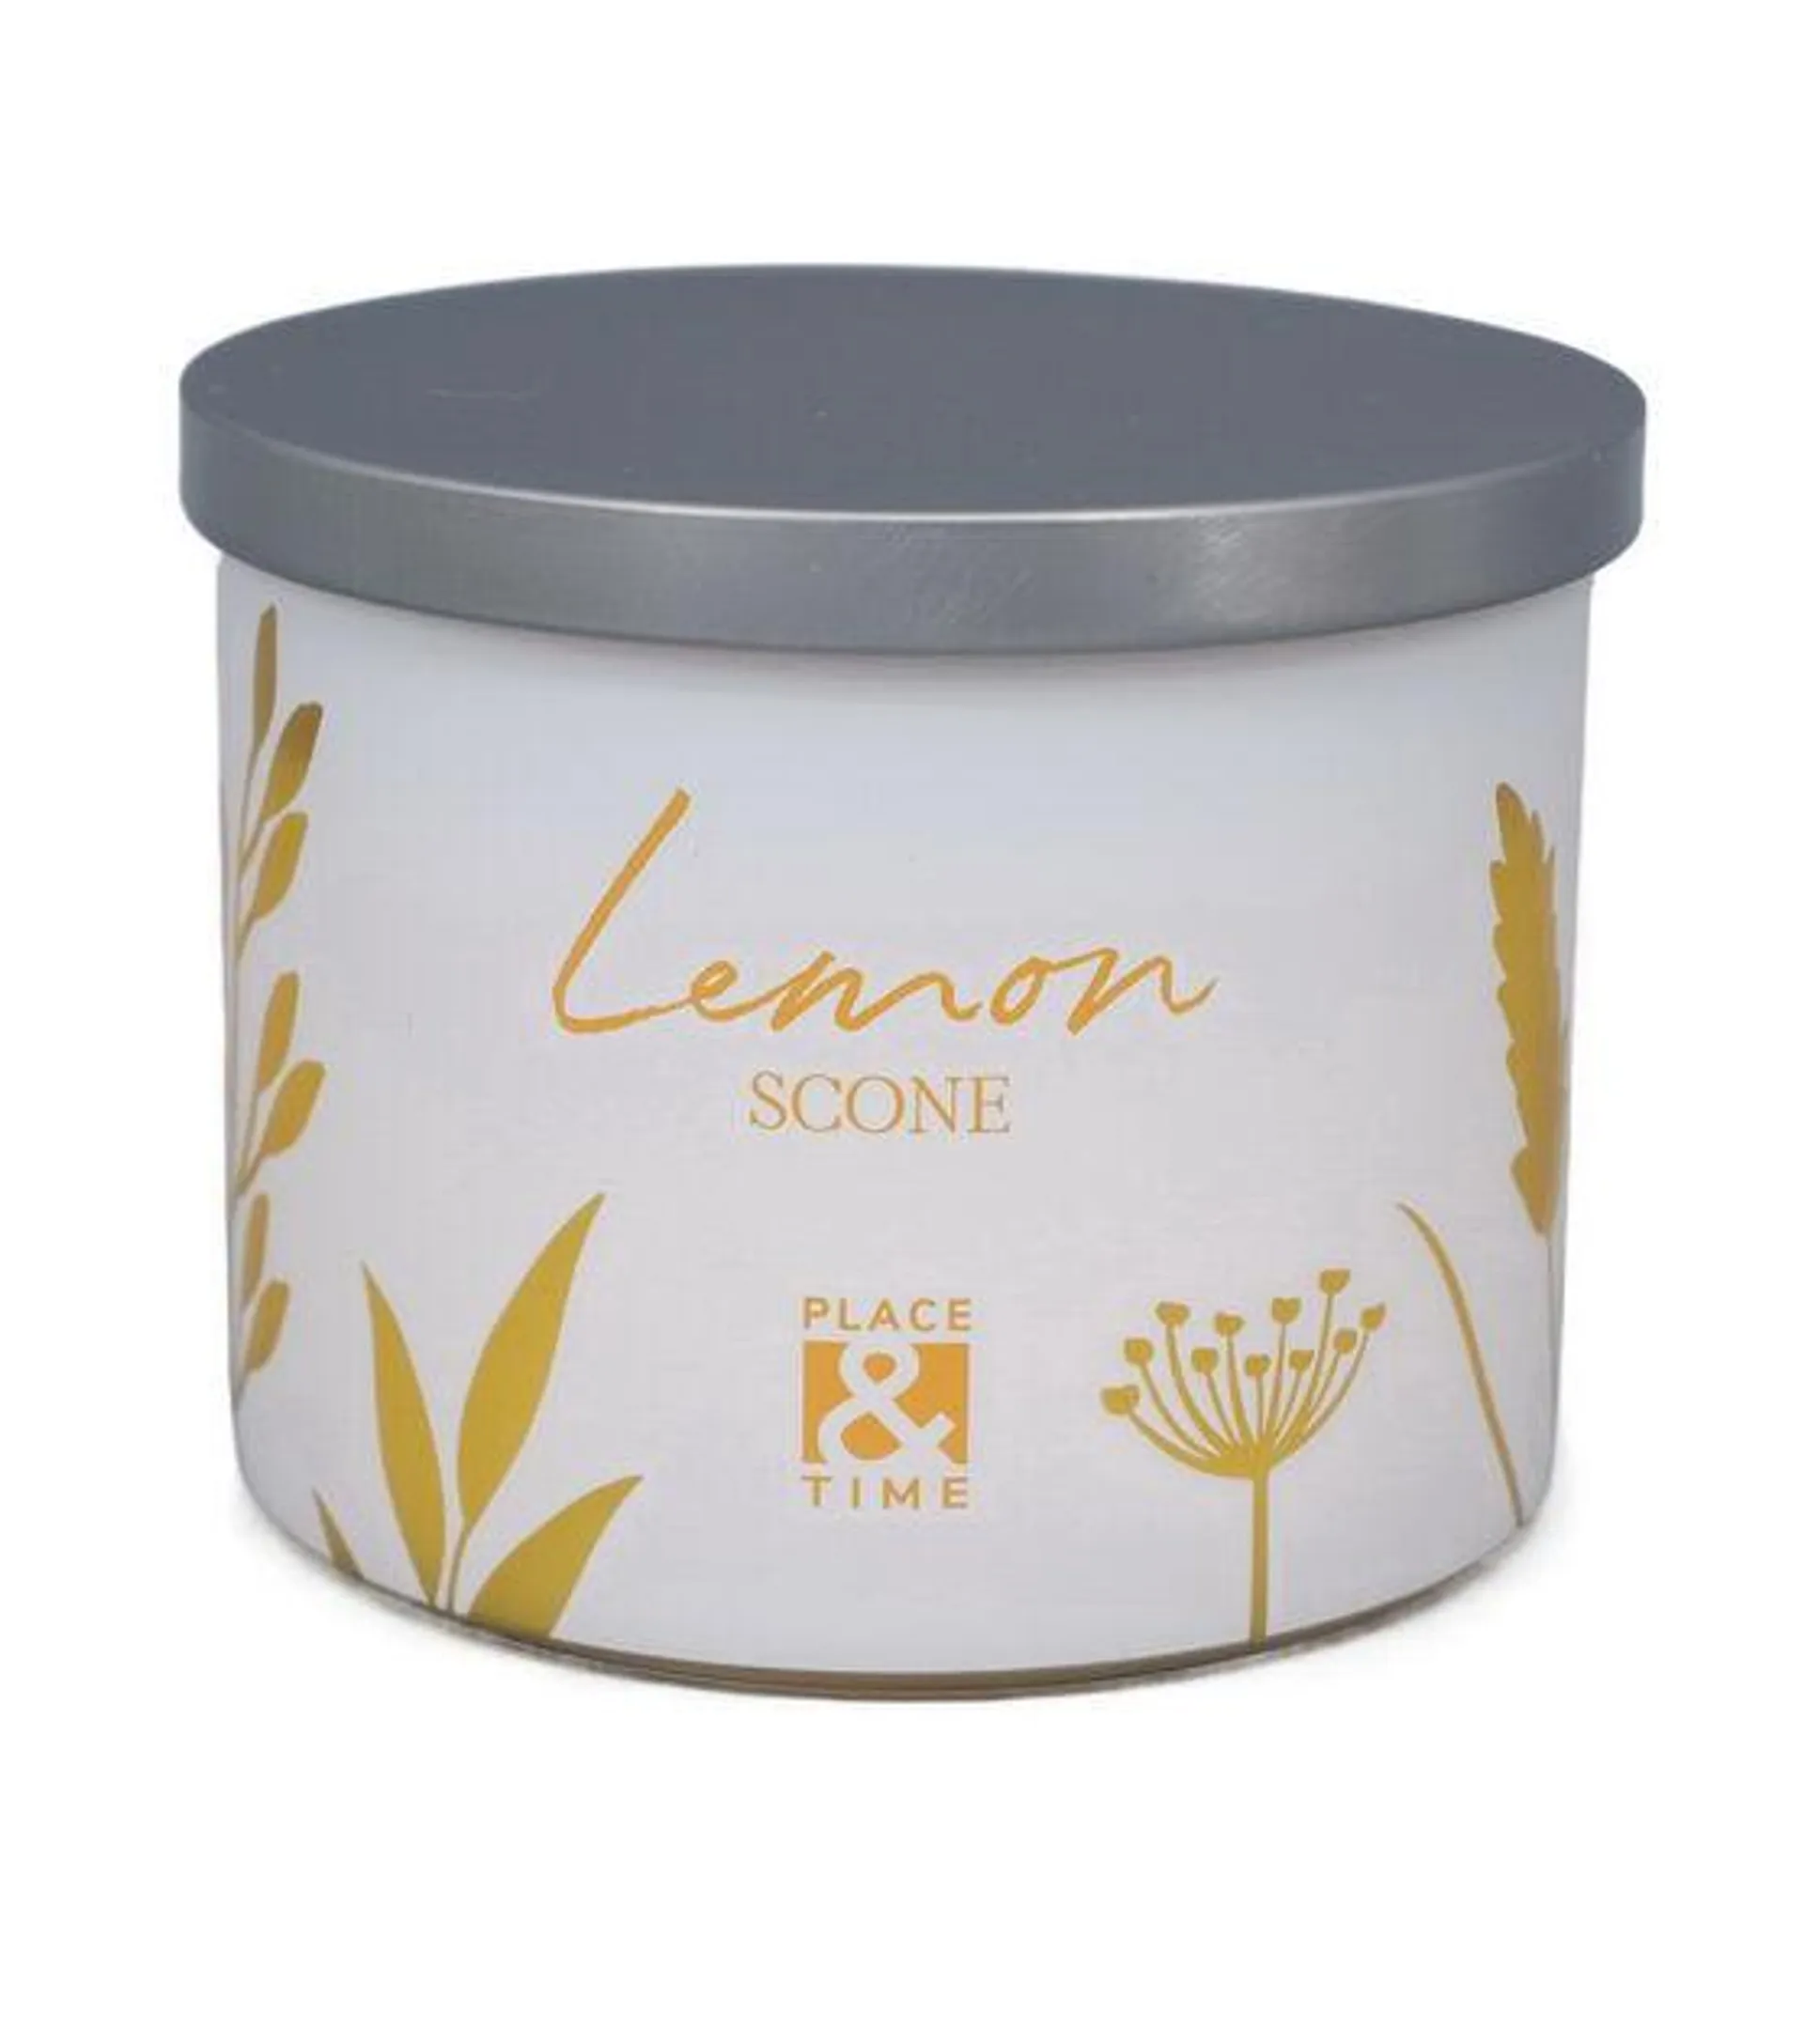 Place & Time 14oz 3-wick Lemon Scone Scented Jar Candle